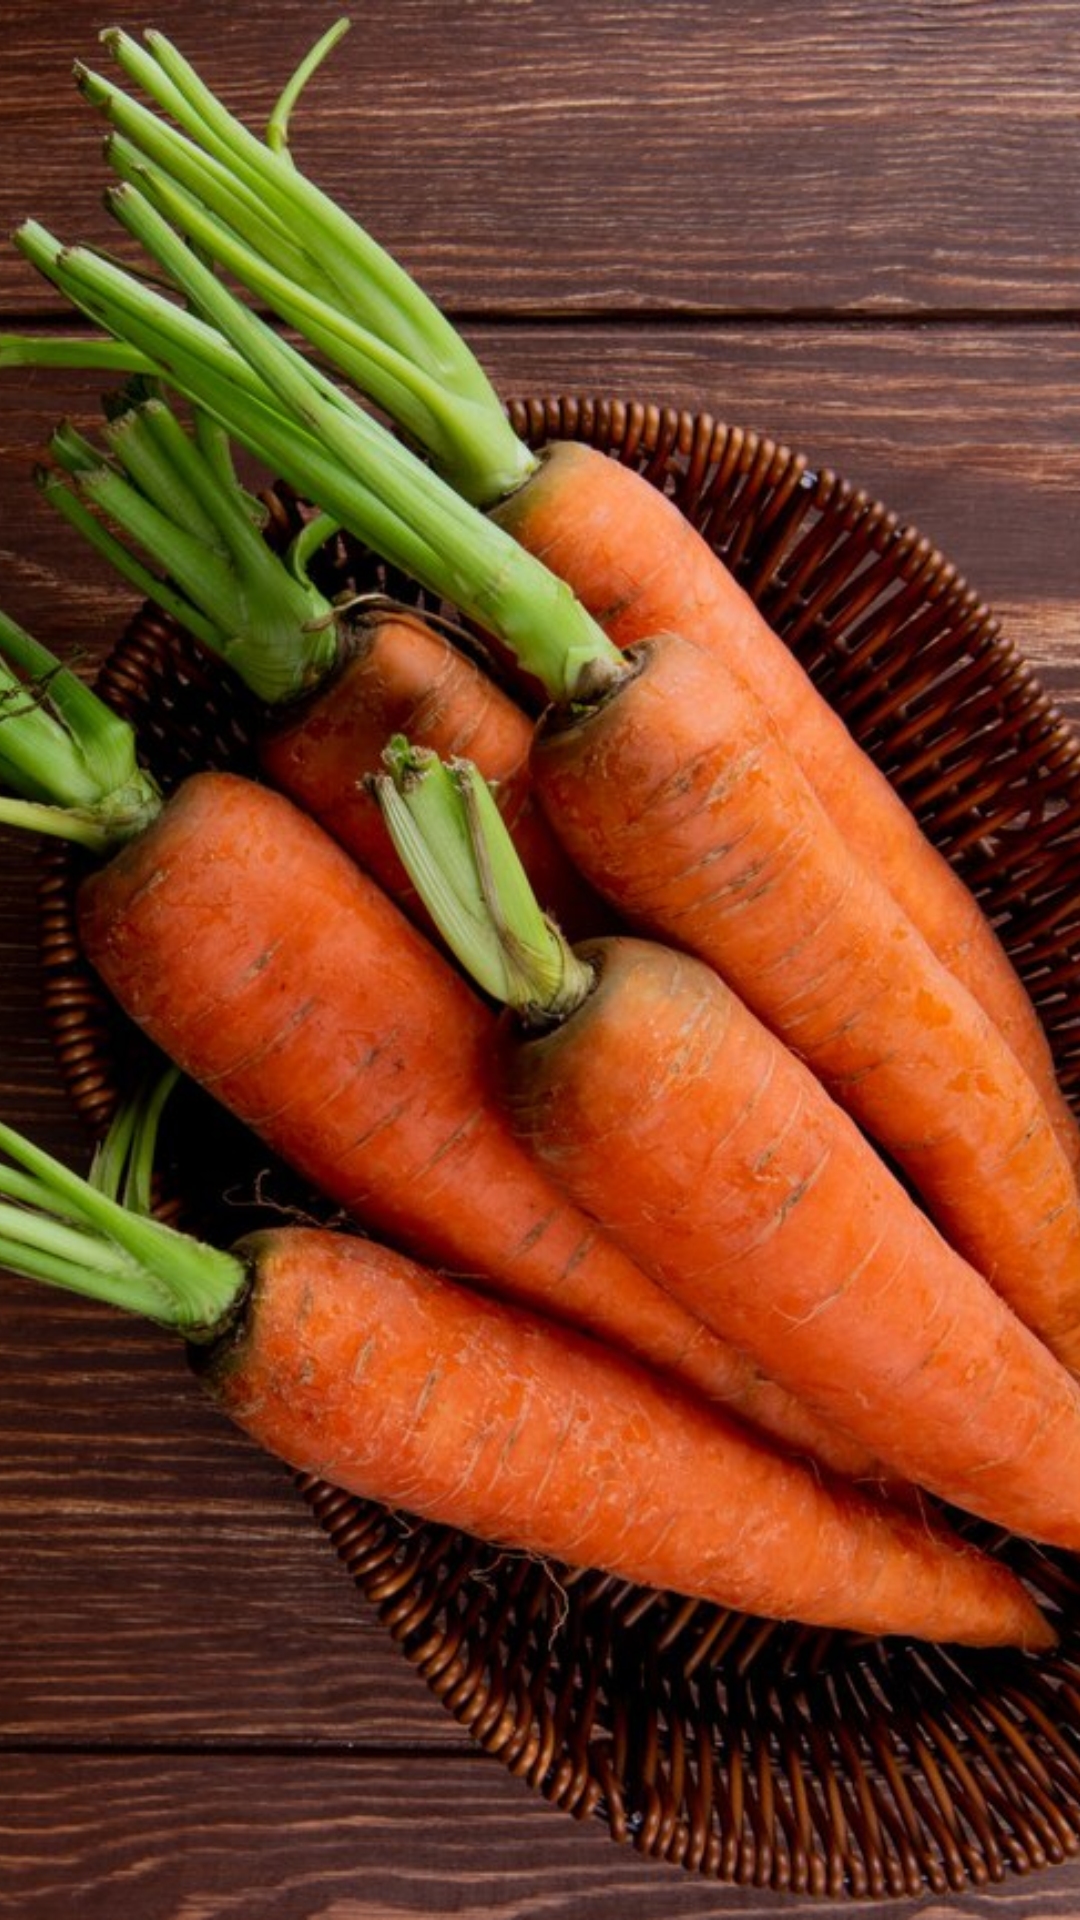 How many carrots to eat daily to remove glasses? 